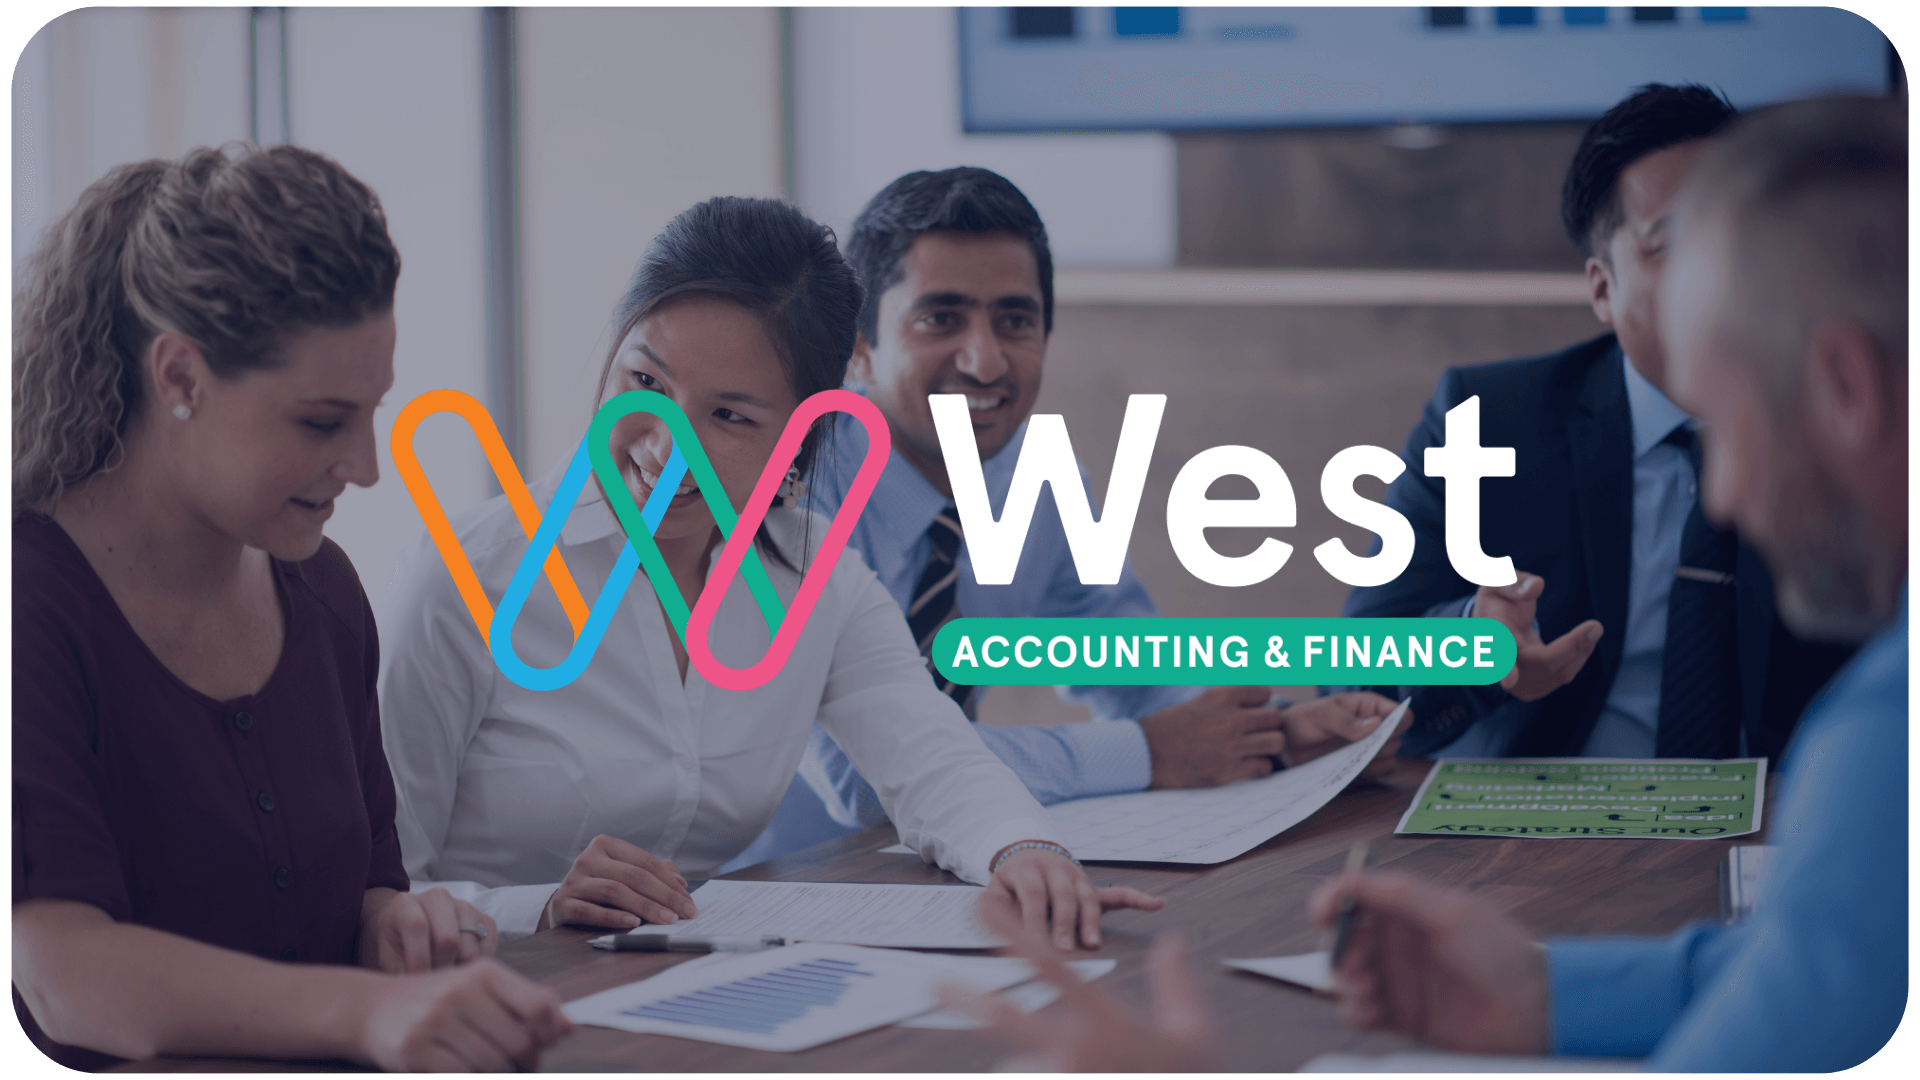 Accounting and Finance Recruitment Sydney